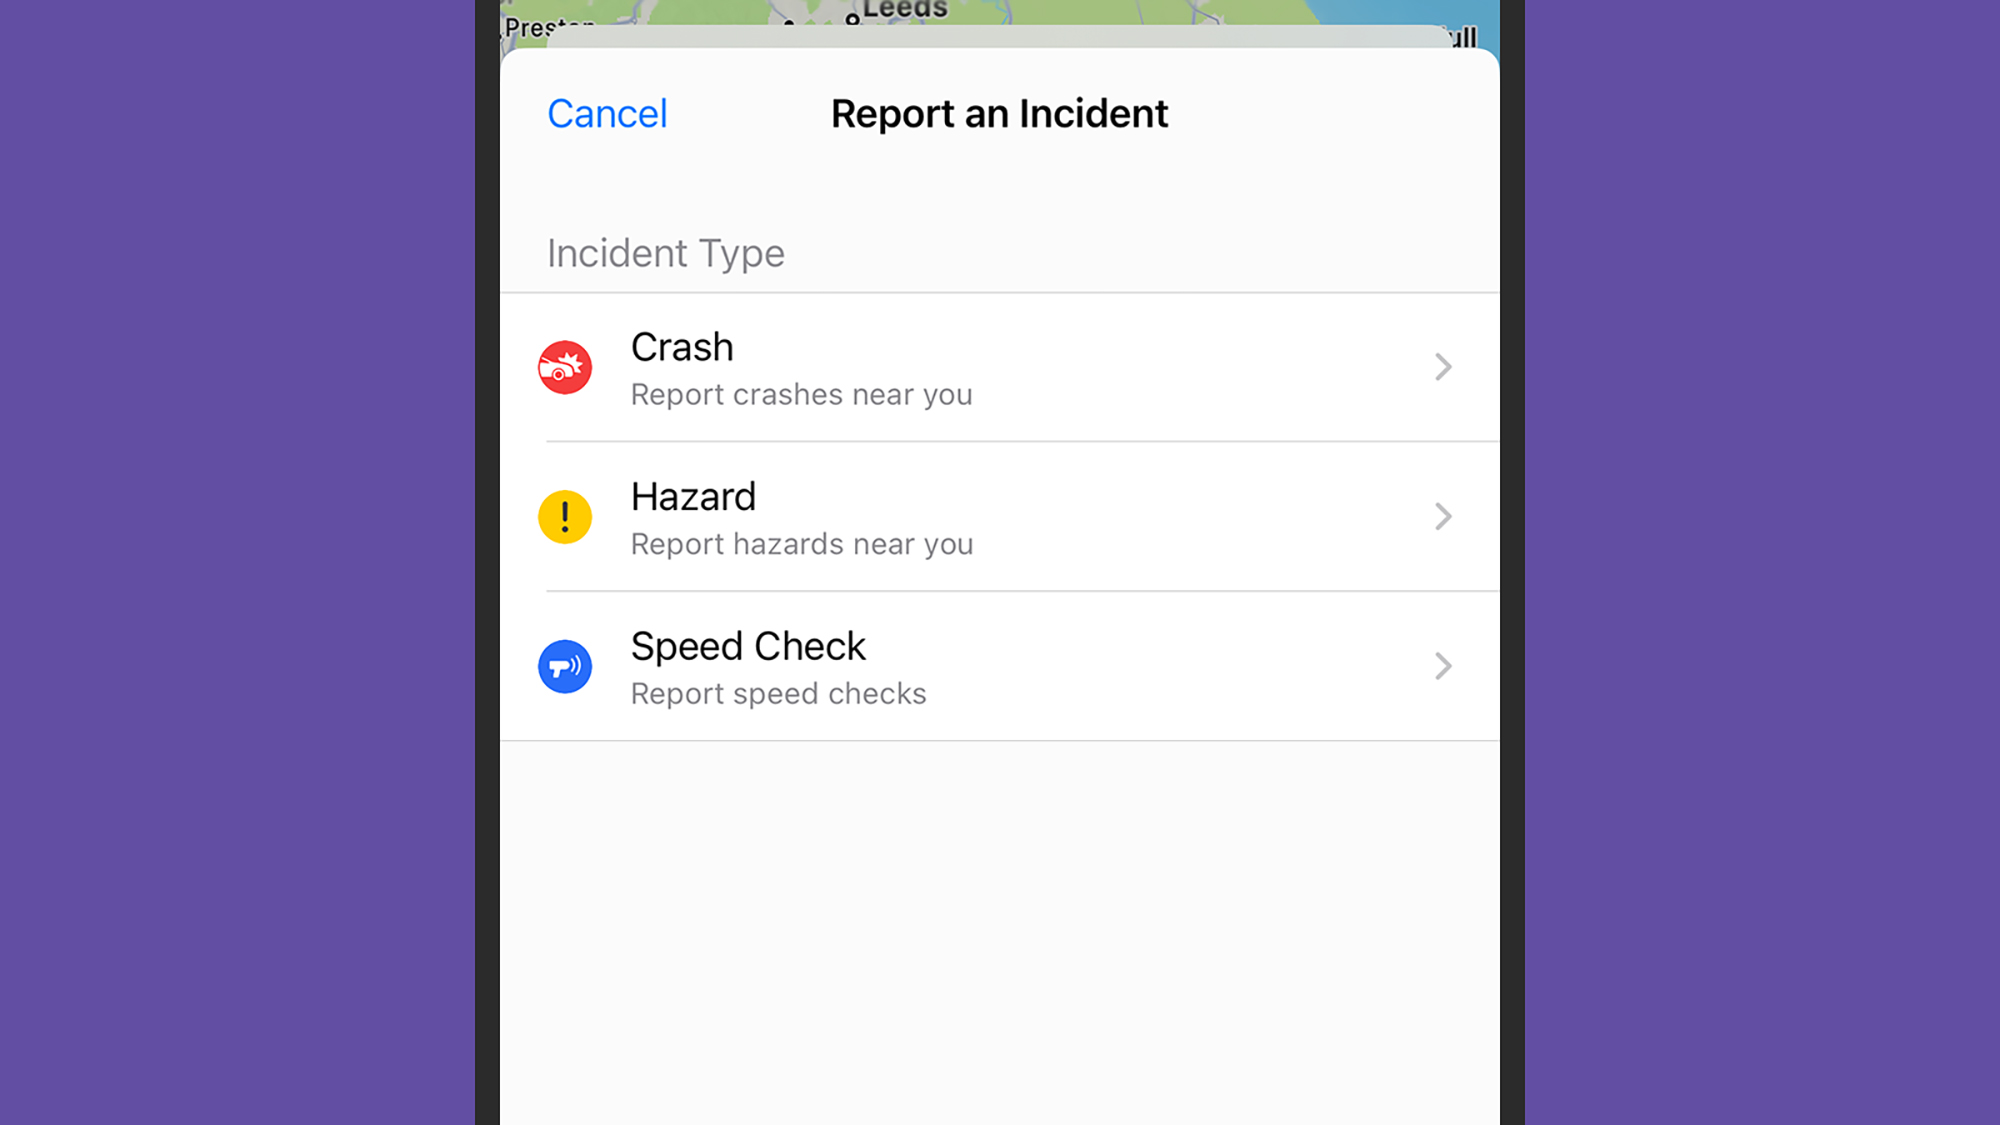 You can report incidents in iOS whether or not you're driving. Credit: David Nield